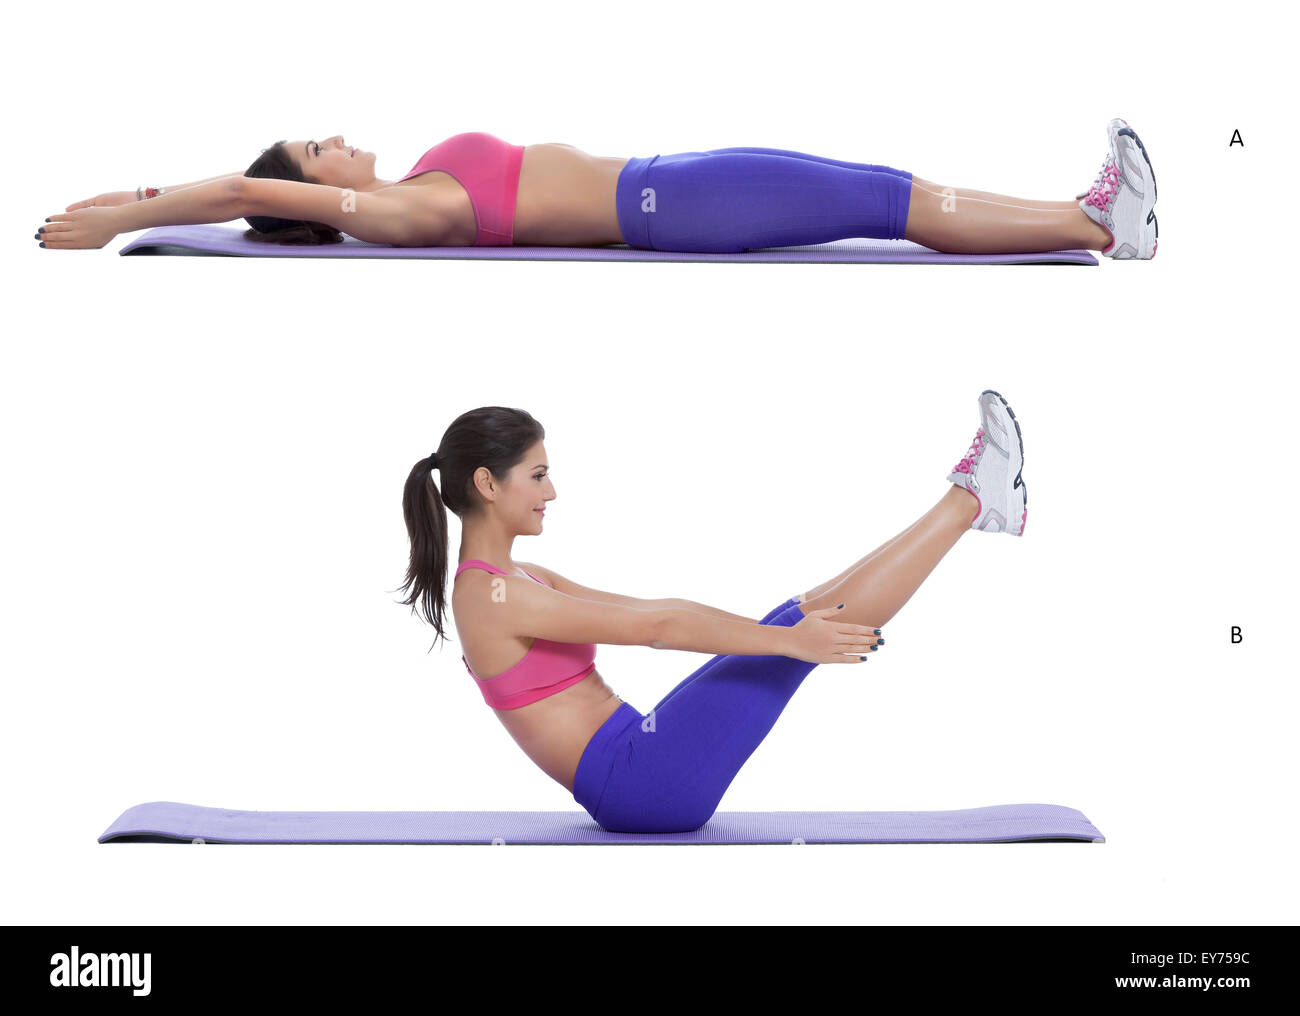 Step by step instructions for abs: Lie on the ground with your legs straight and feet together. Bring both arms overhead and res Stock Photo